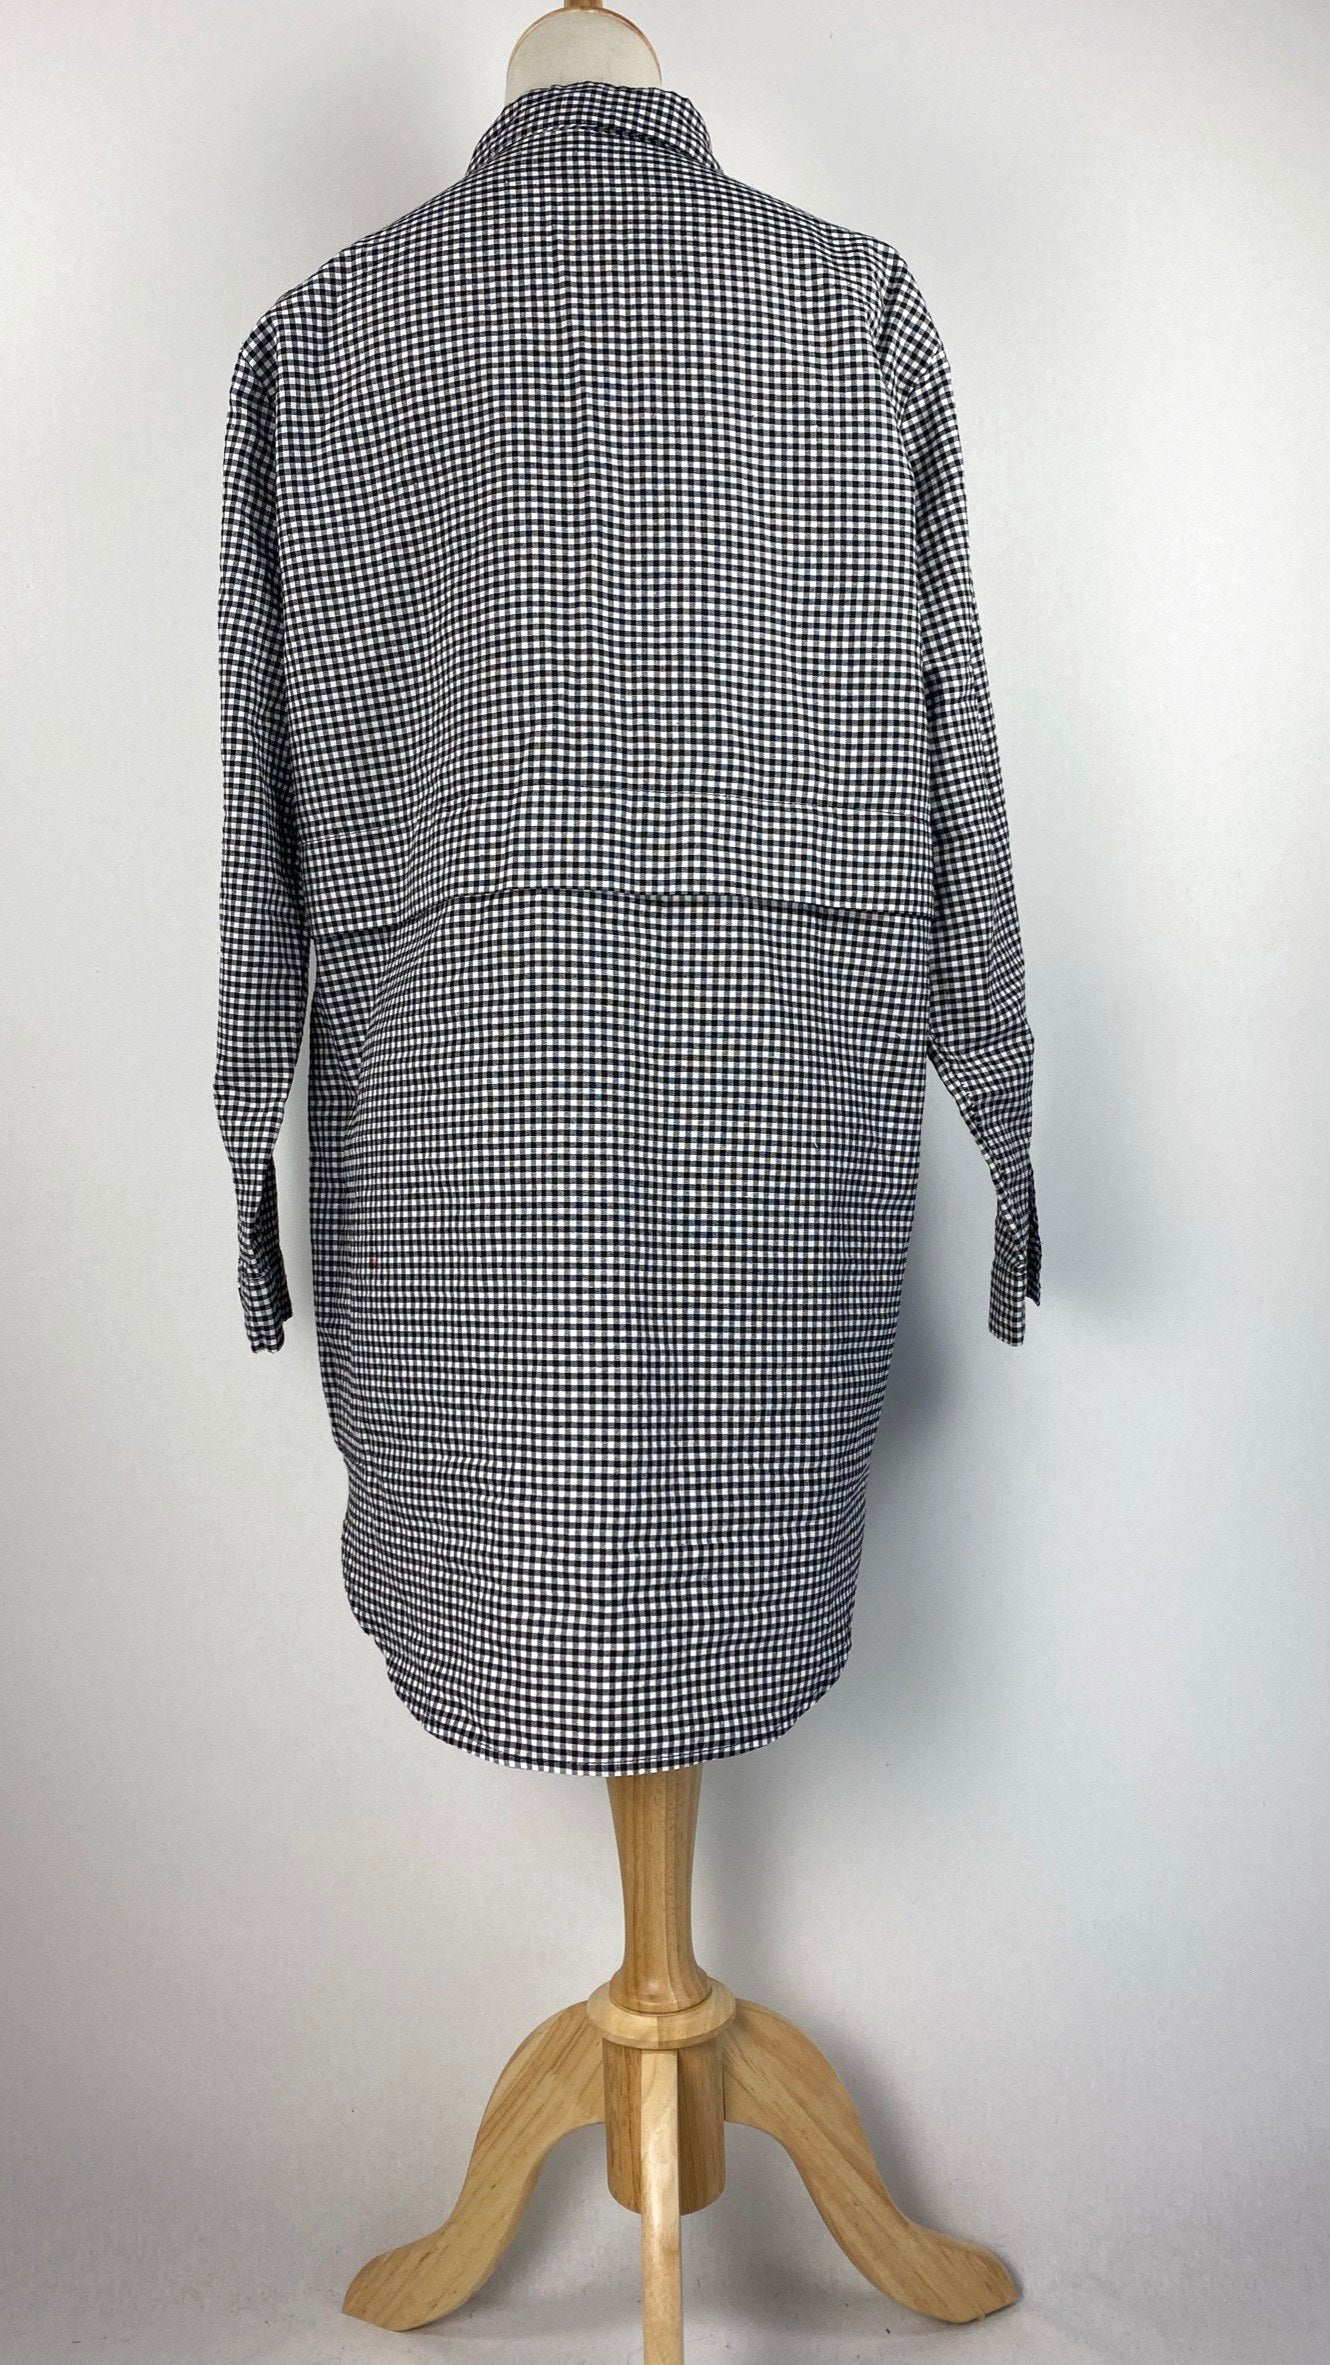 Long Sleeve Button Up Checkered Knee Length Top, Black and White